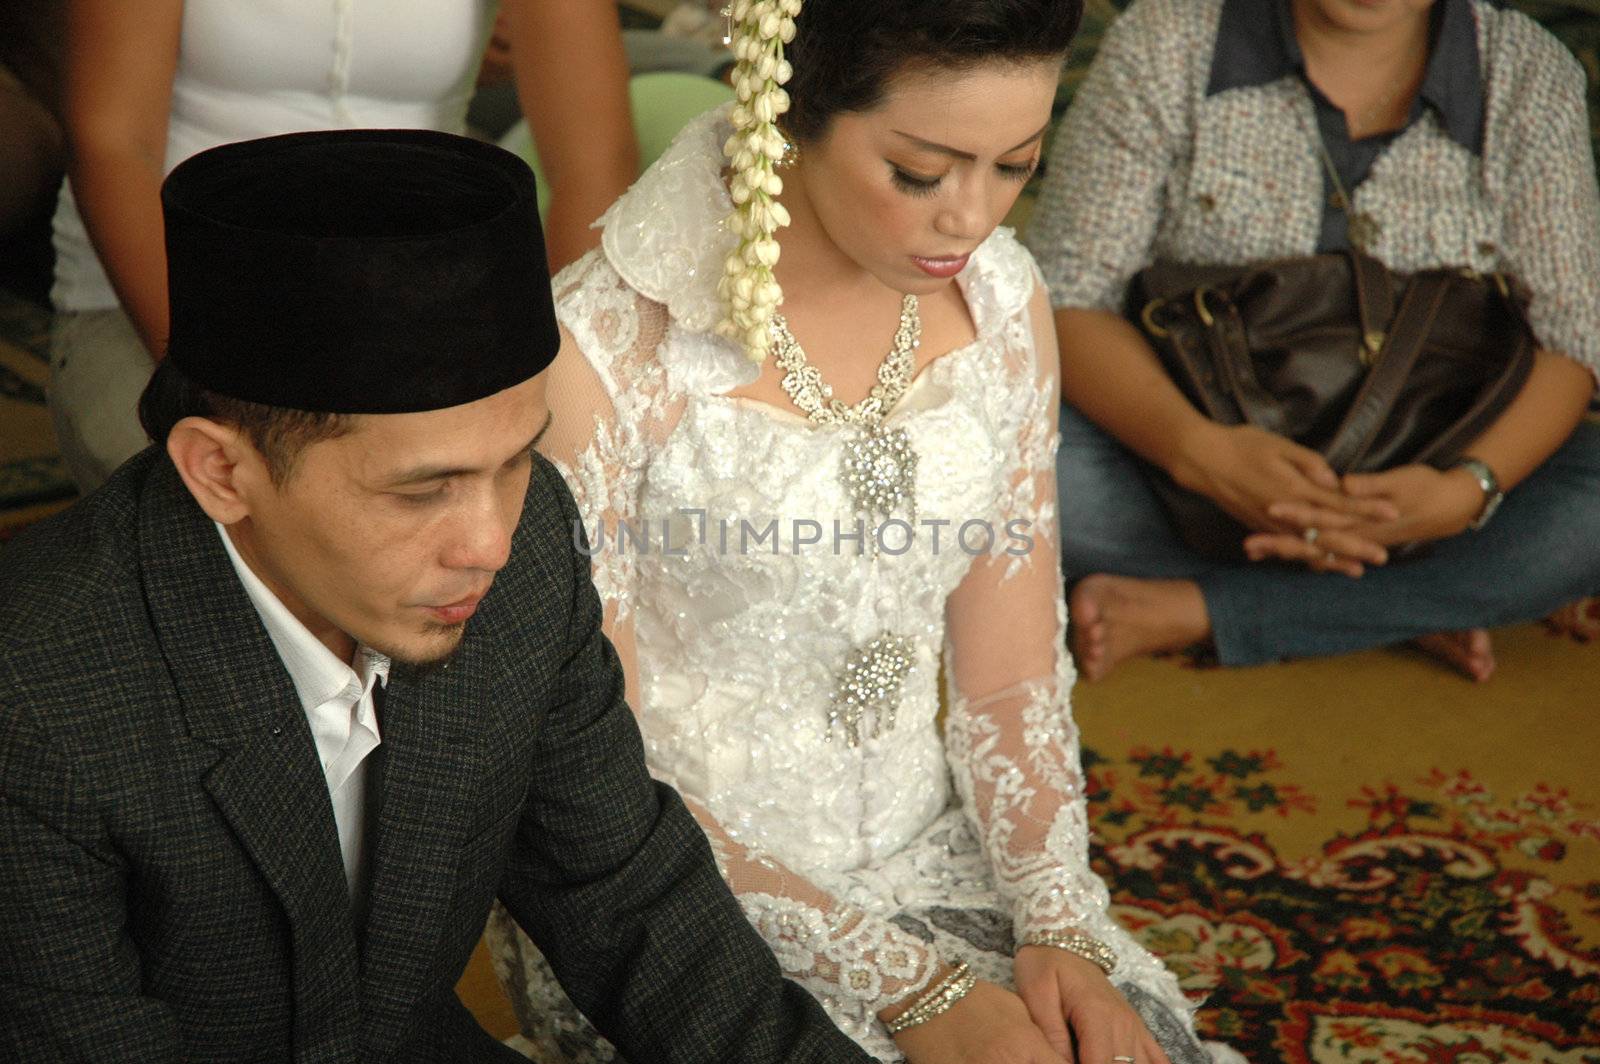 bride and groom wearing traditional costume from west java-indonesia